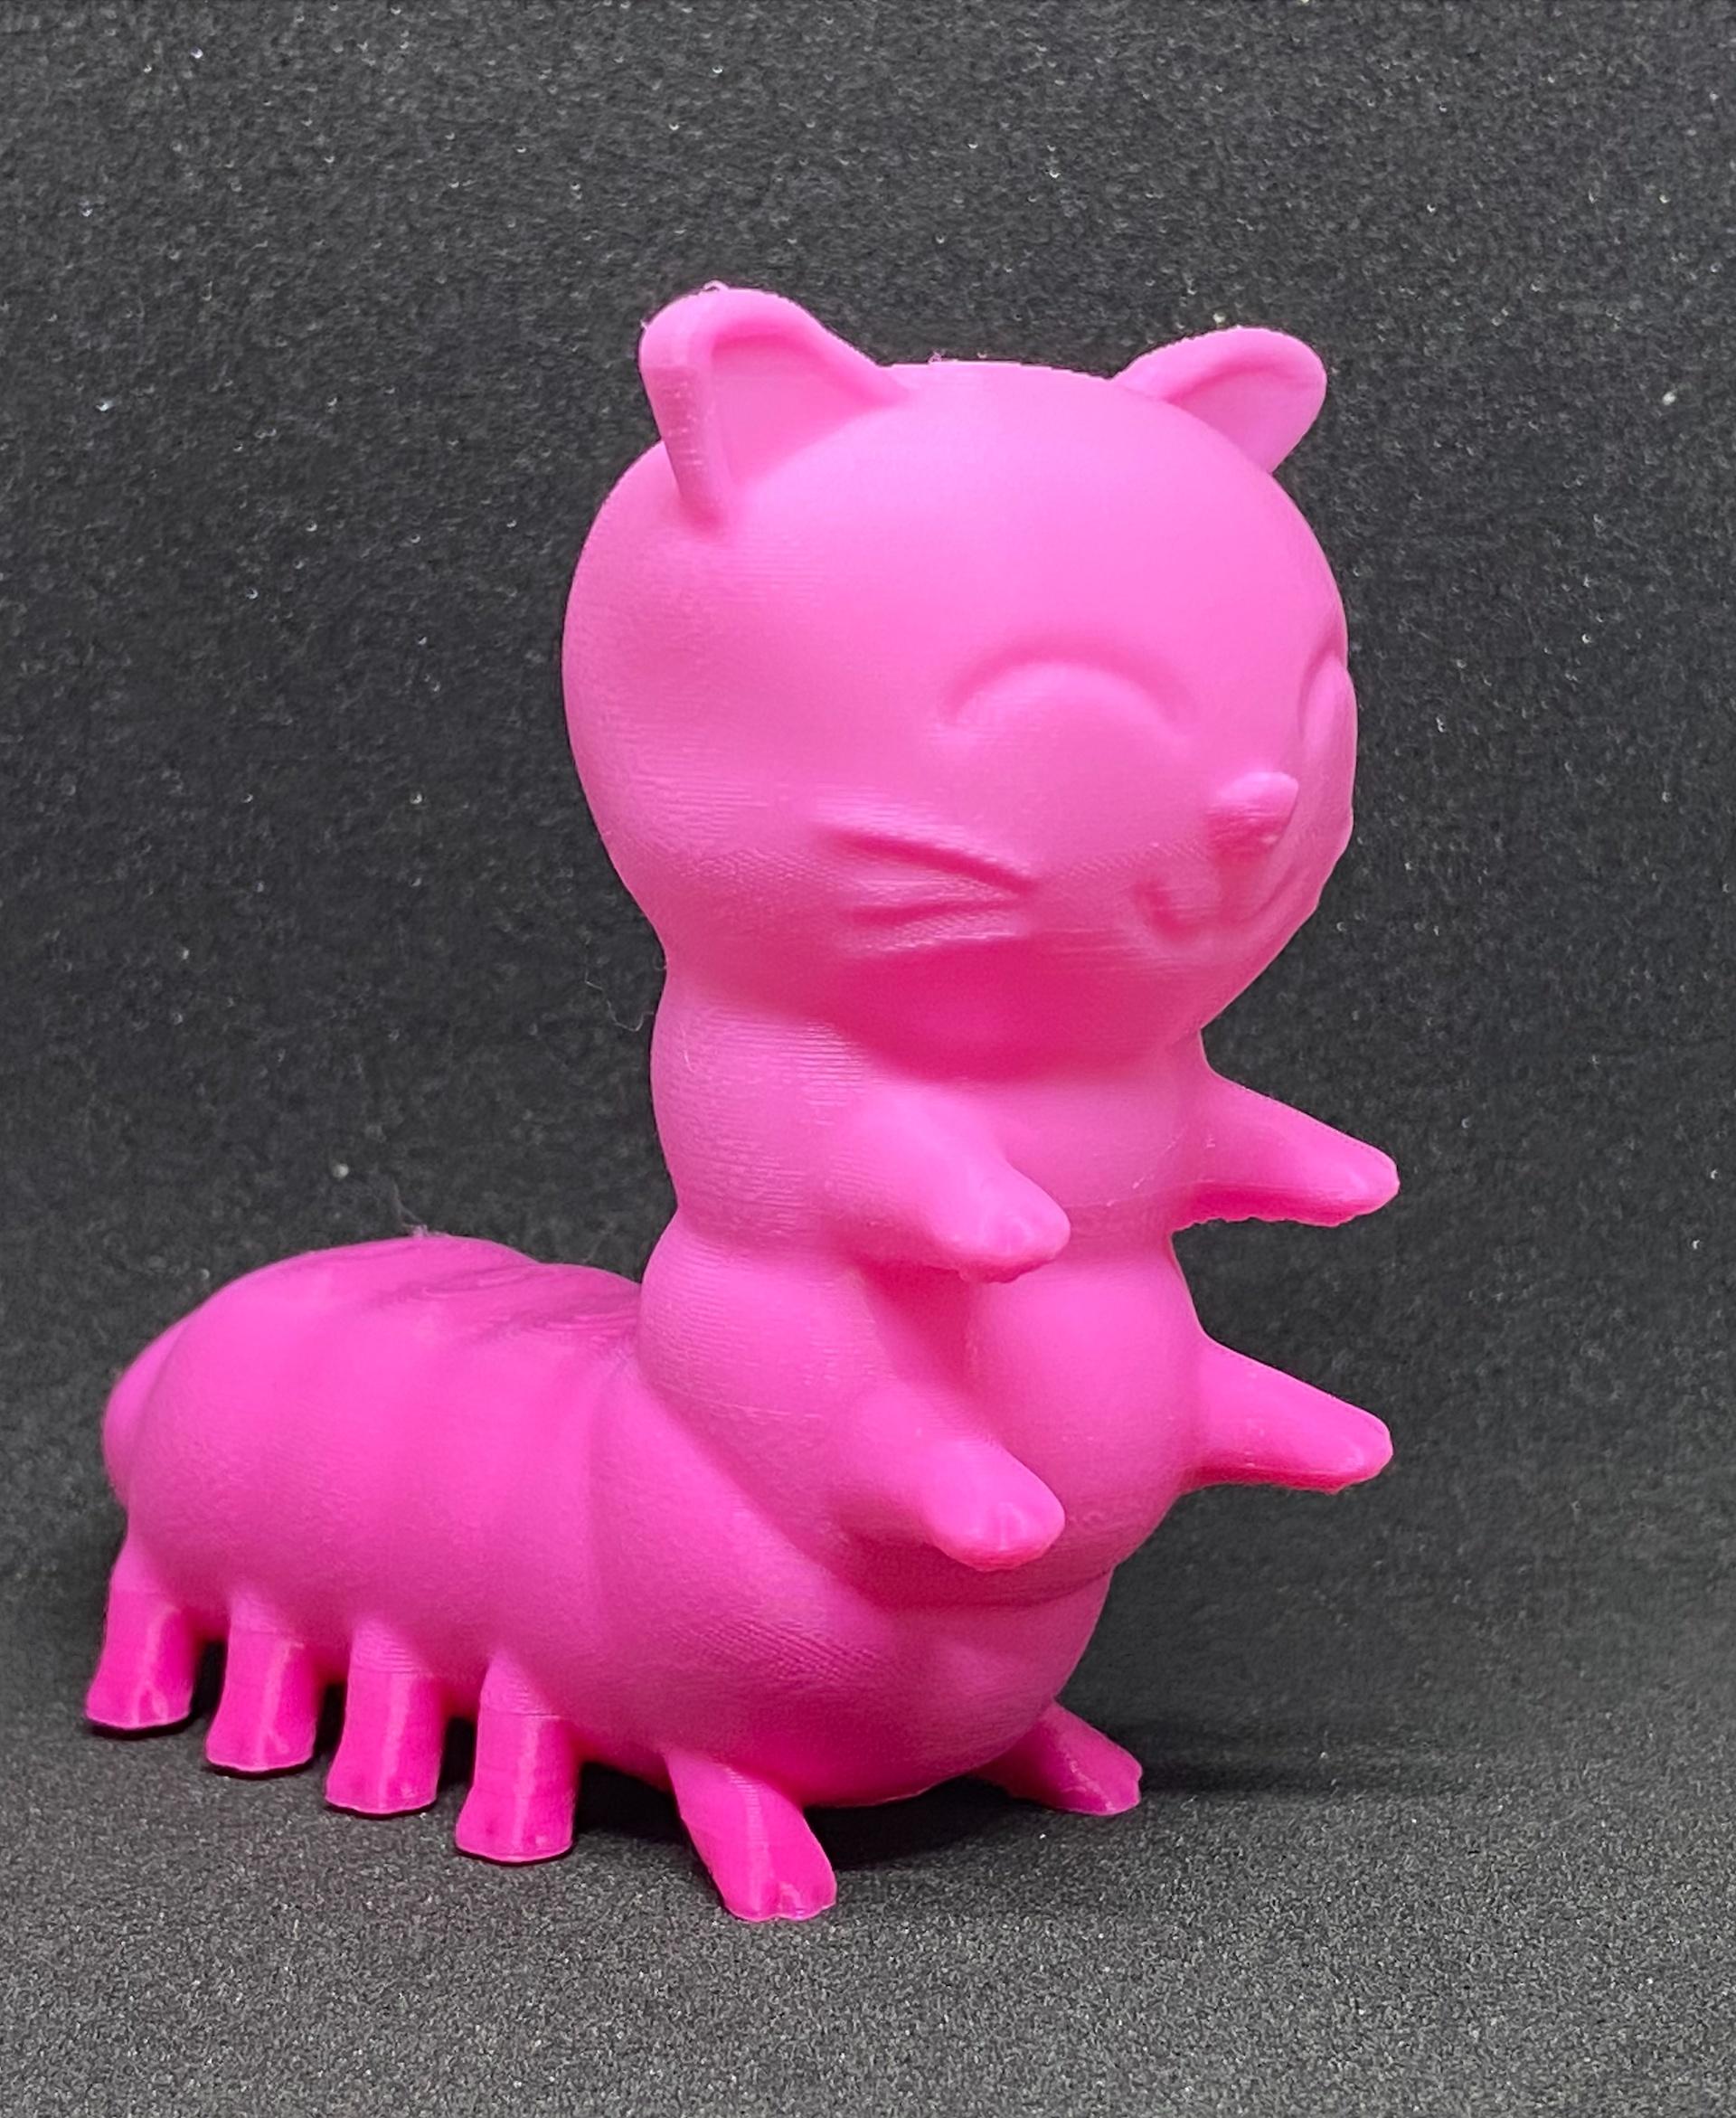 CAT - I couldn't help myself. I had to print it. Thanks for making the model available! - 3d model